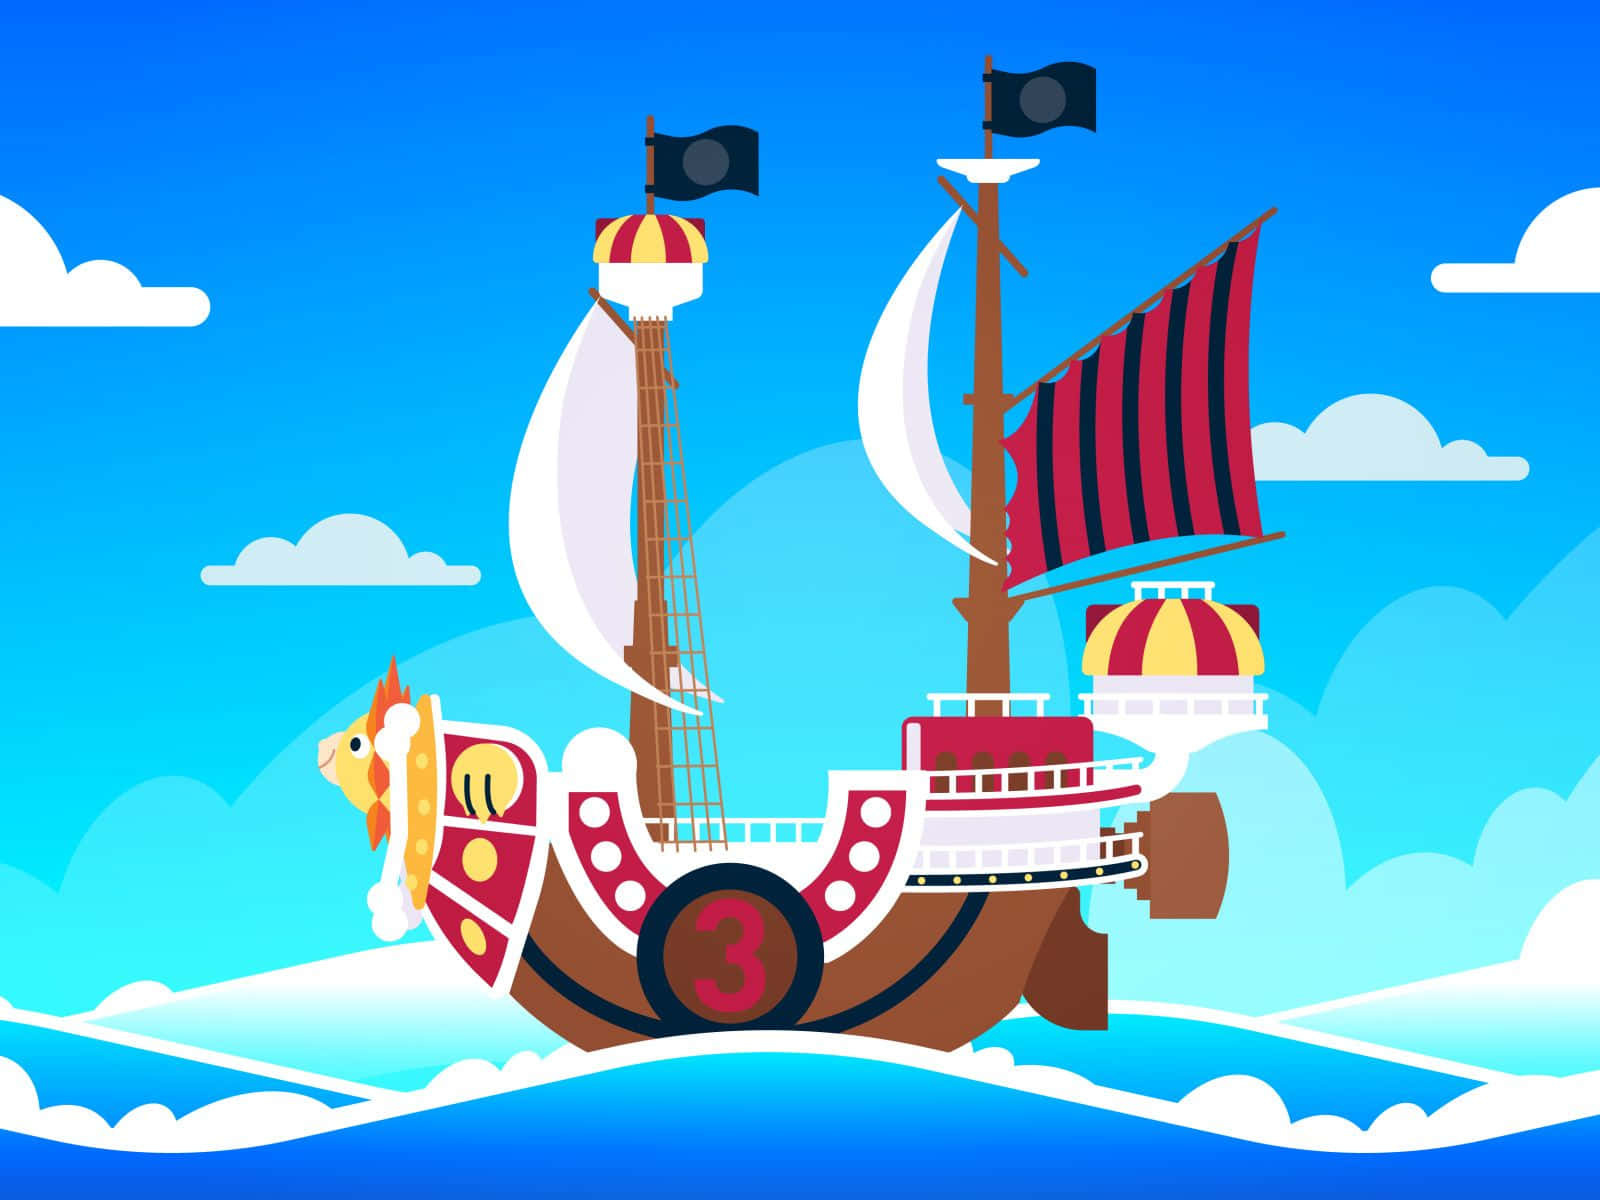 "The world-famous Thousand Sunny Cruises Across The Sea!" Wallpaper